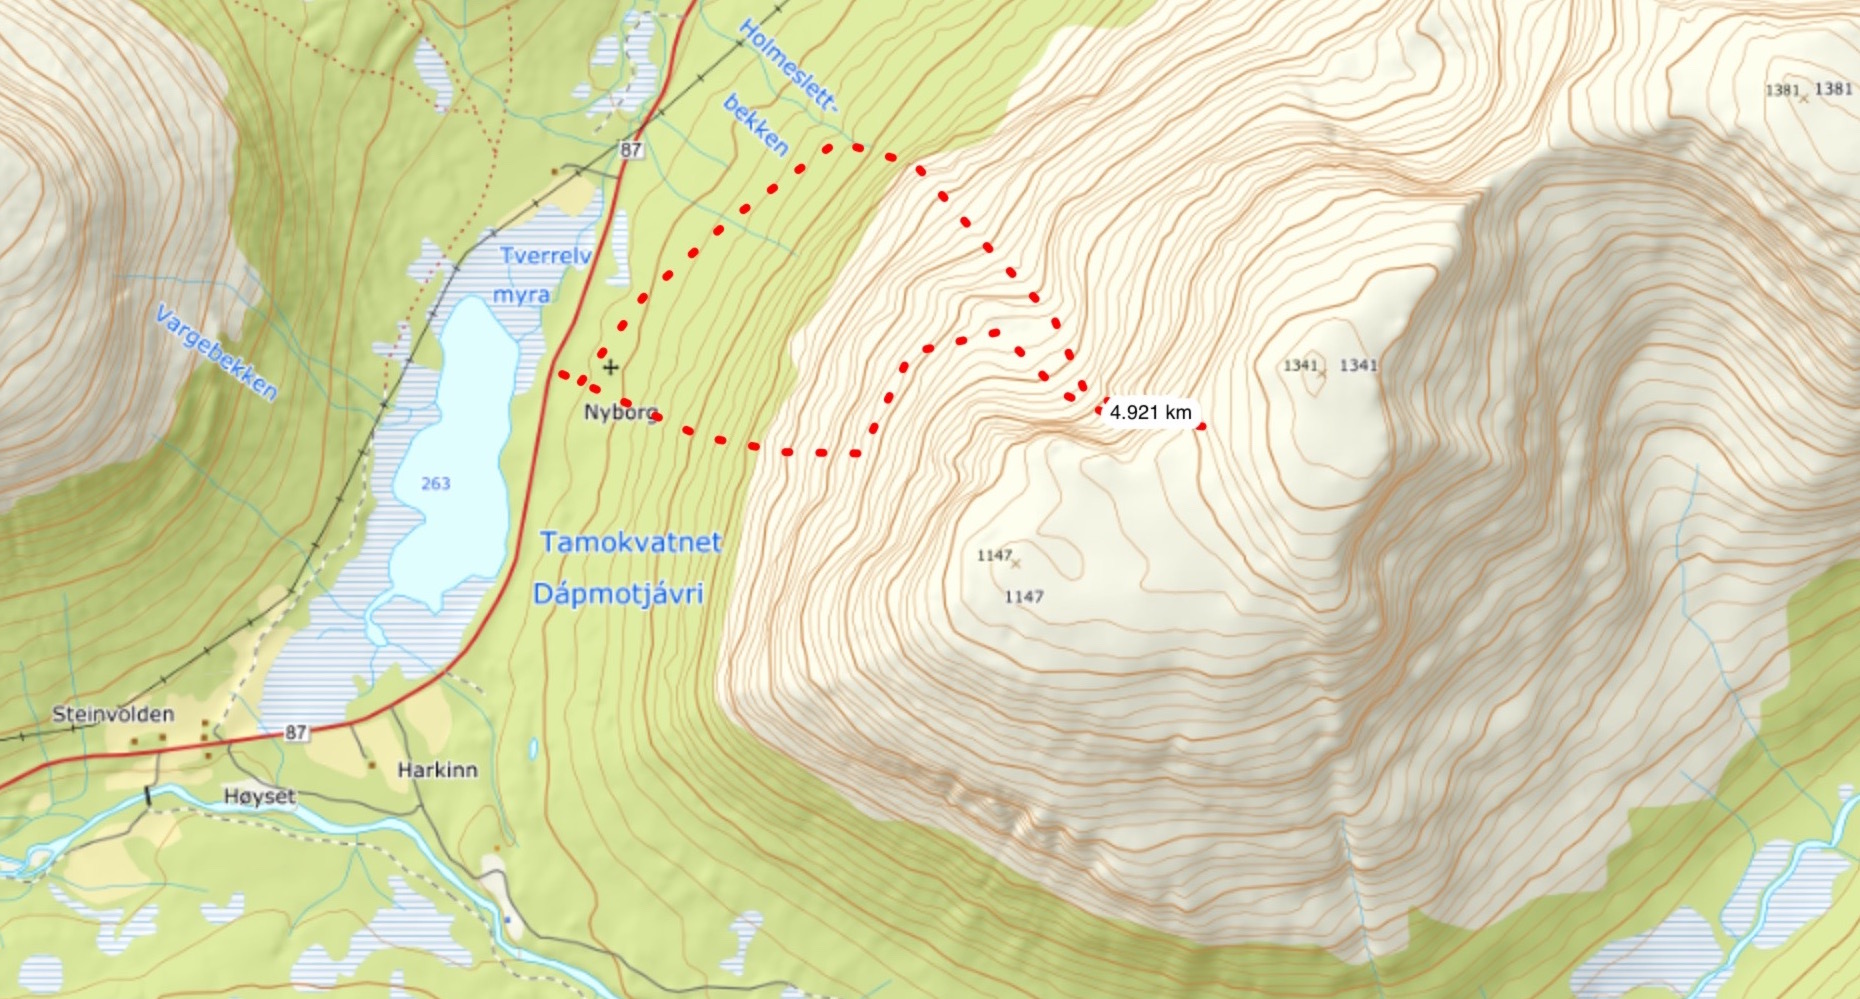 Topographical map of the north chute of Tamokfjellet in Norway